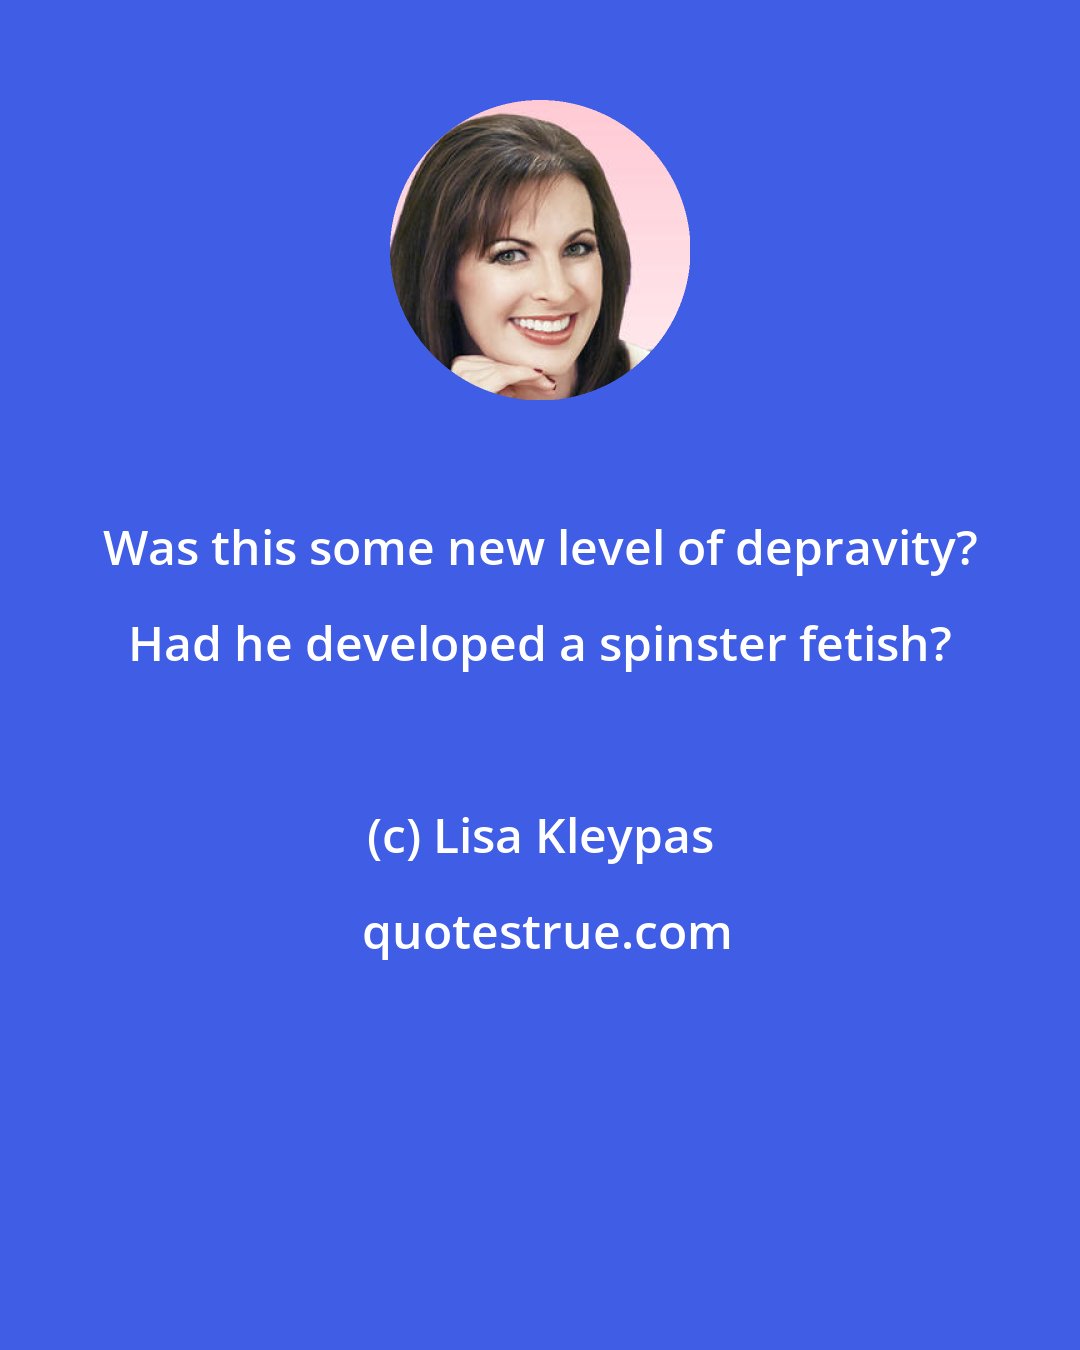 Lisa Kleypas: Was this some new level of depravity? Had he developed a spinster fetish?